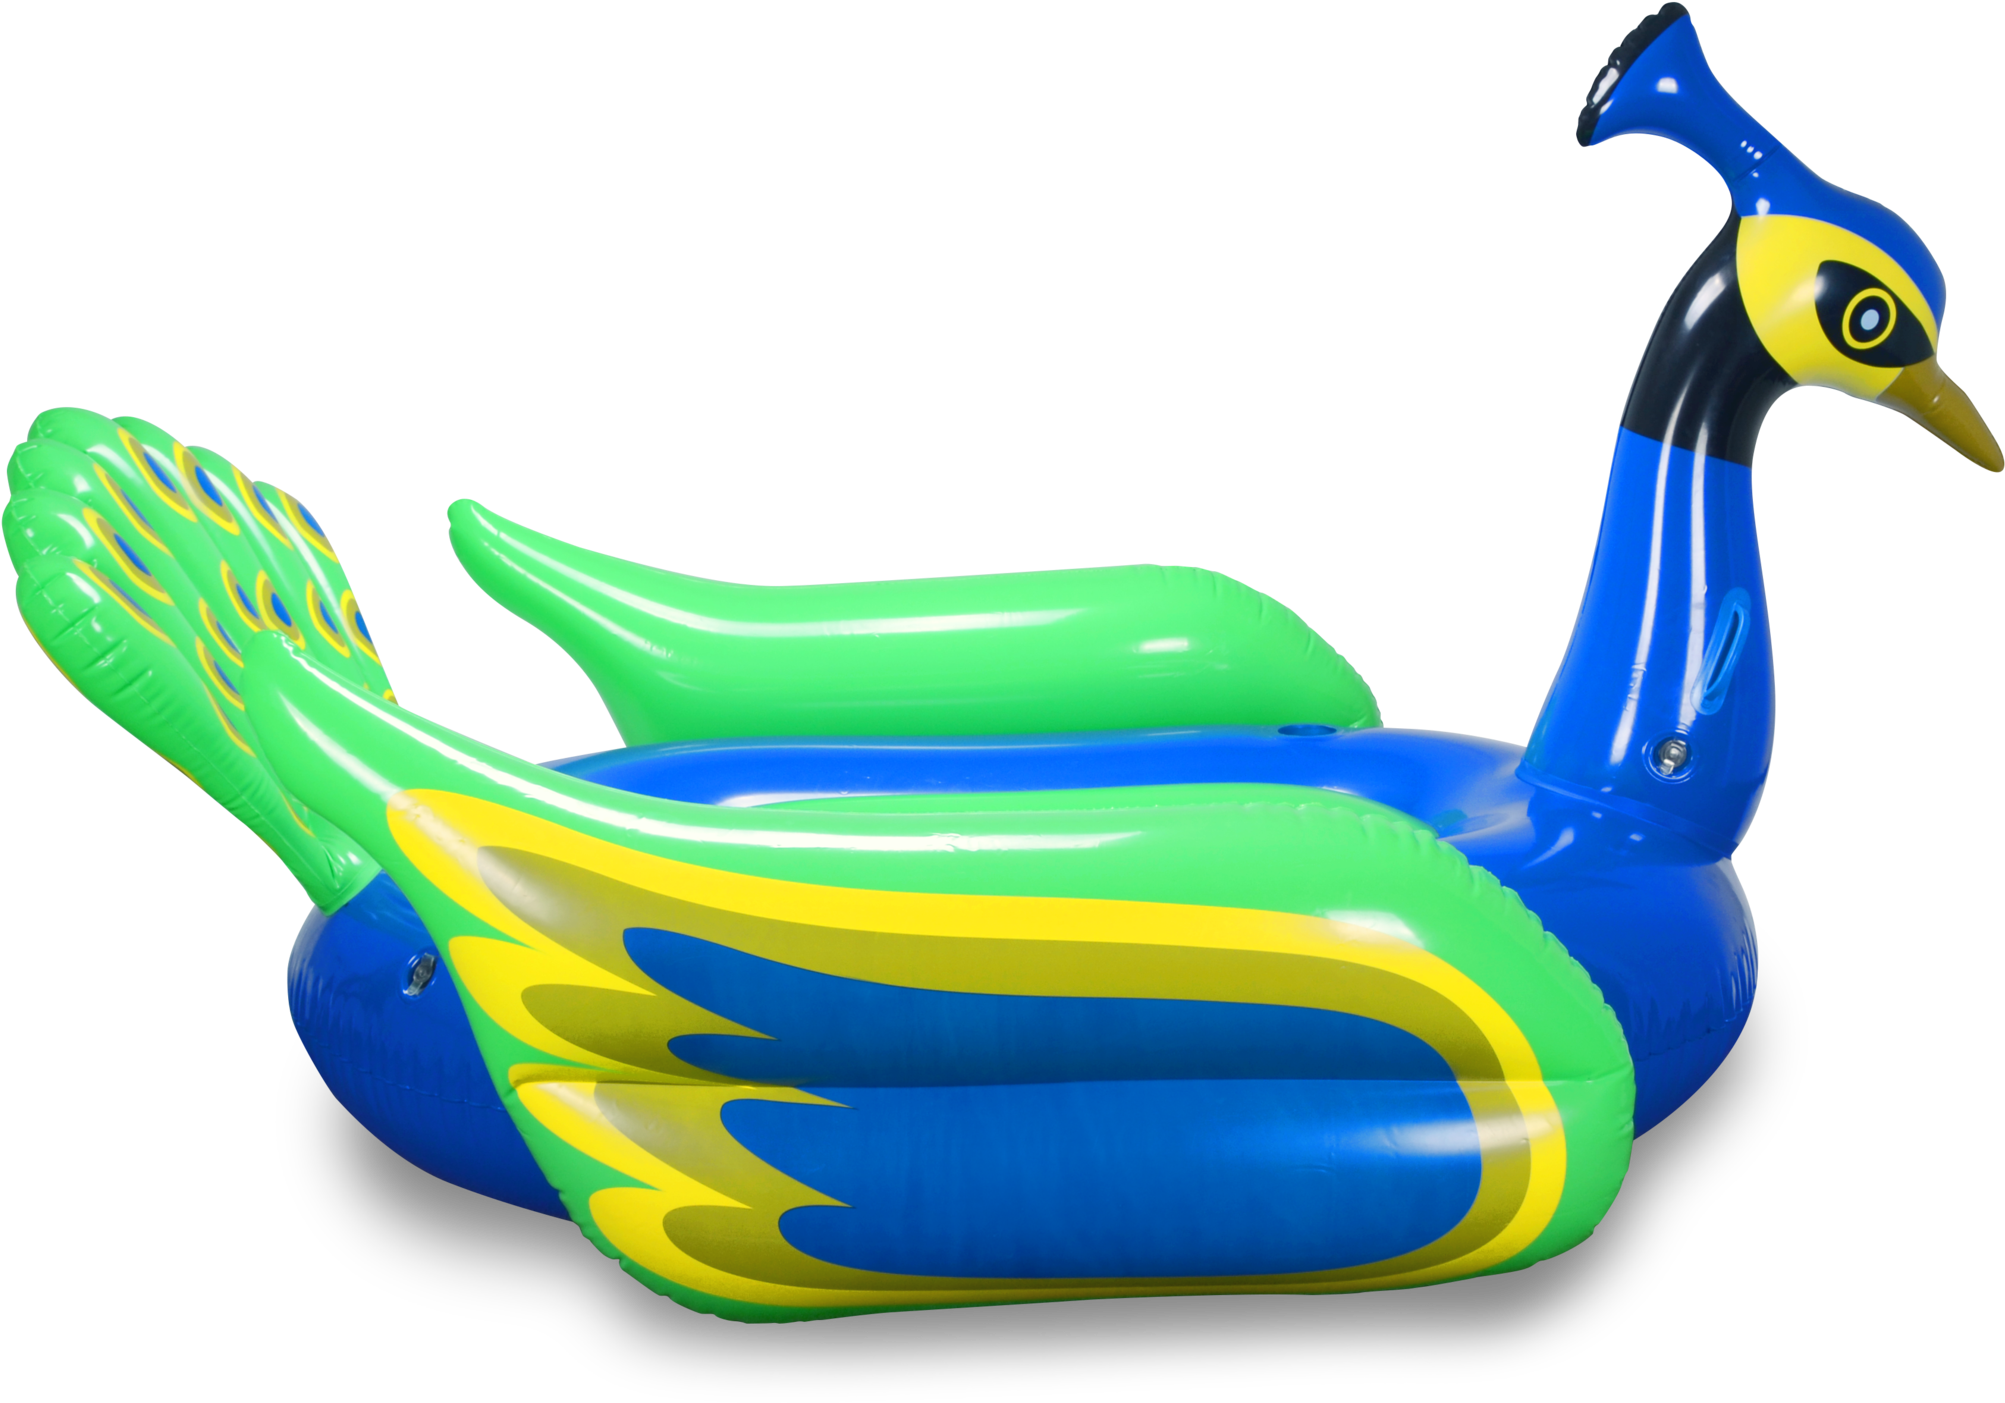 Inflatable Peacock Pool Toy - Swimming Pool (2048x1827)